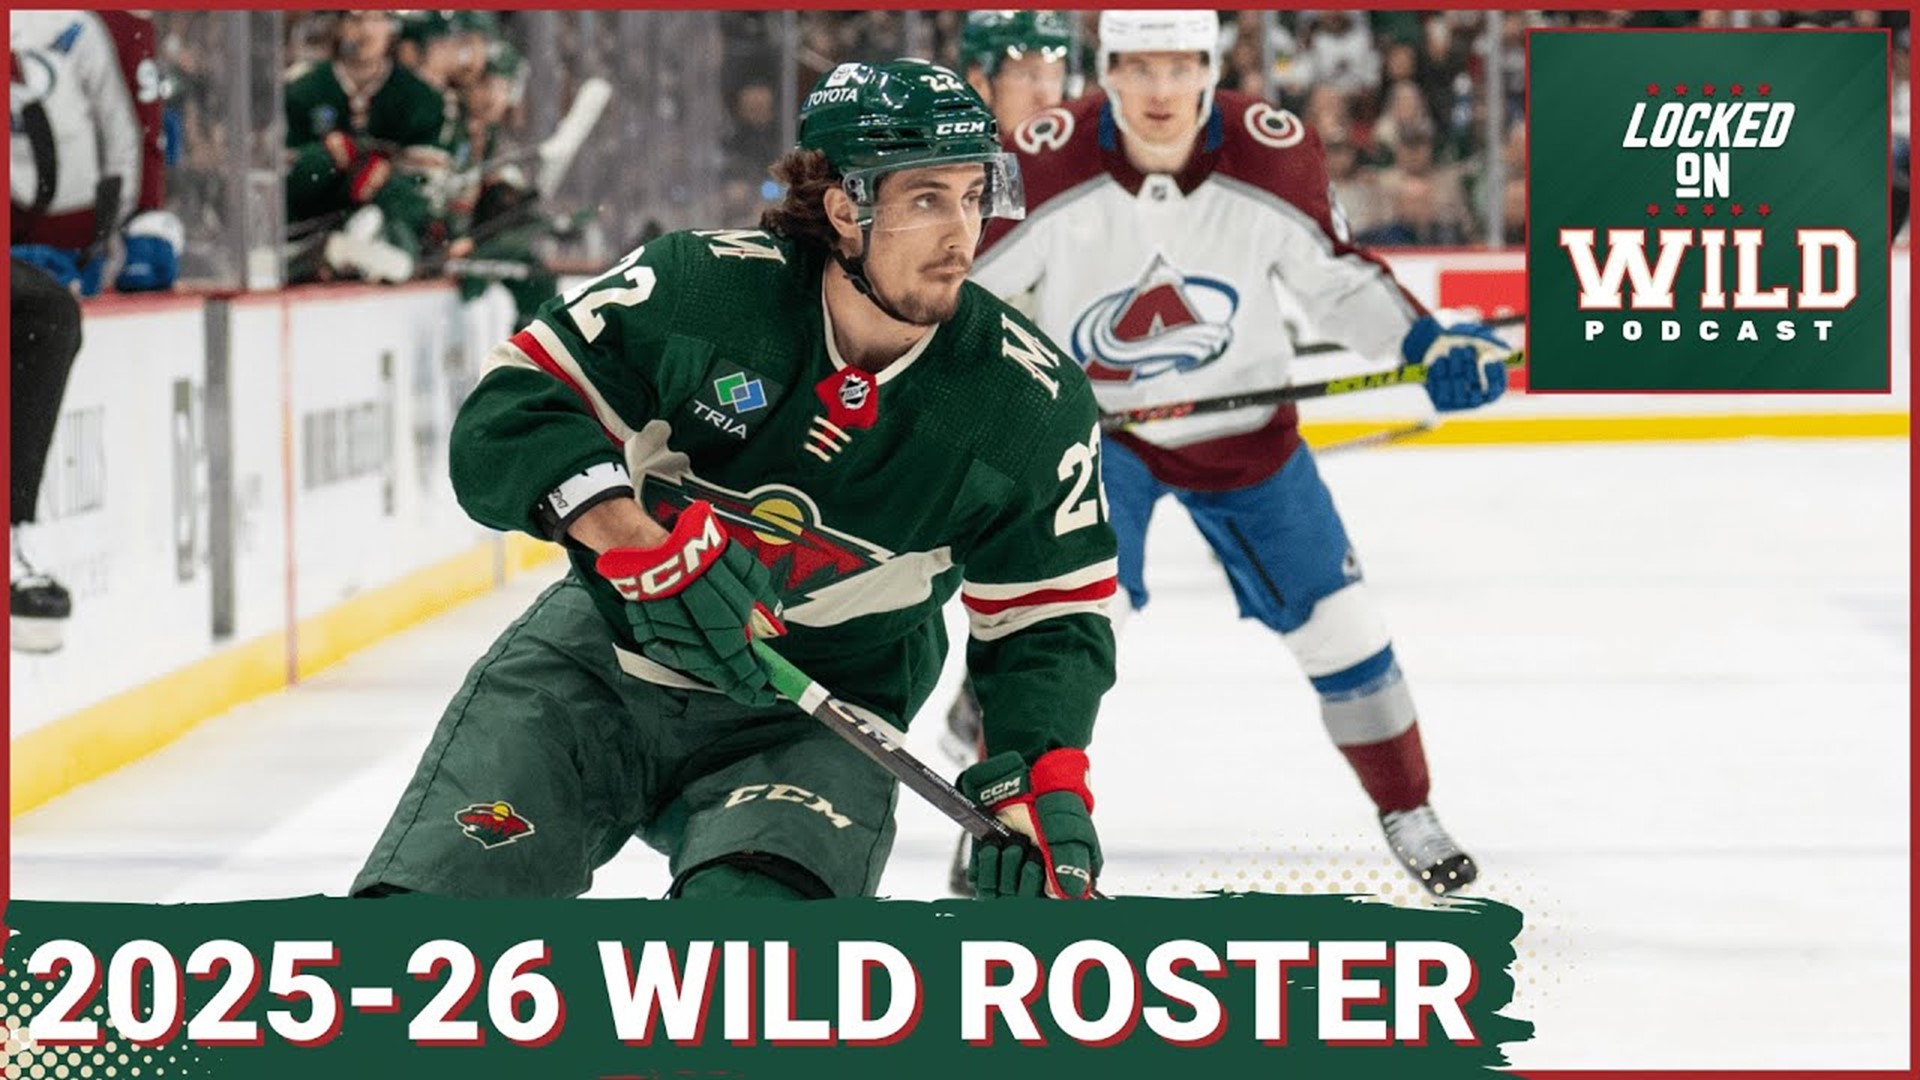 What Could the Wild Roster Look like in 2025-26?